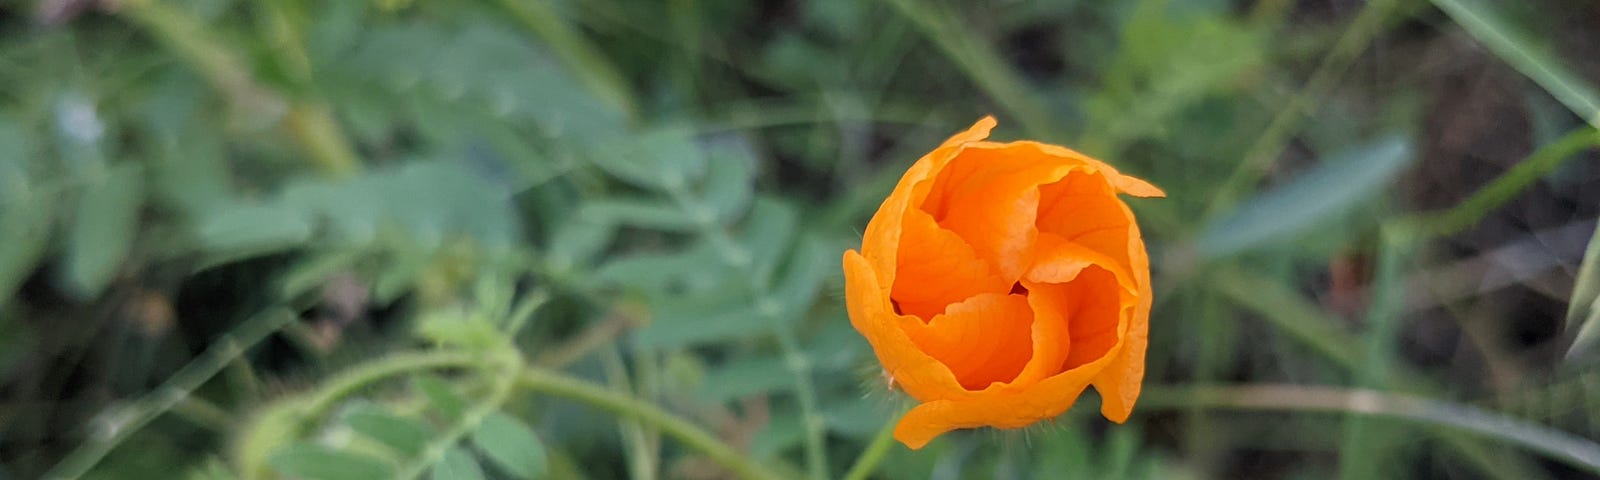 Orange flower surrounded by greenery